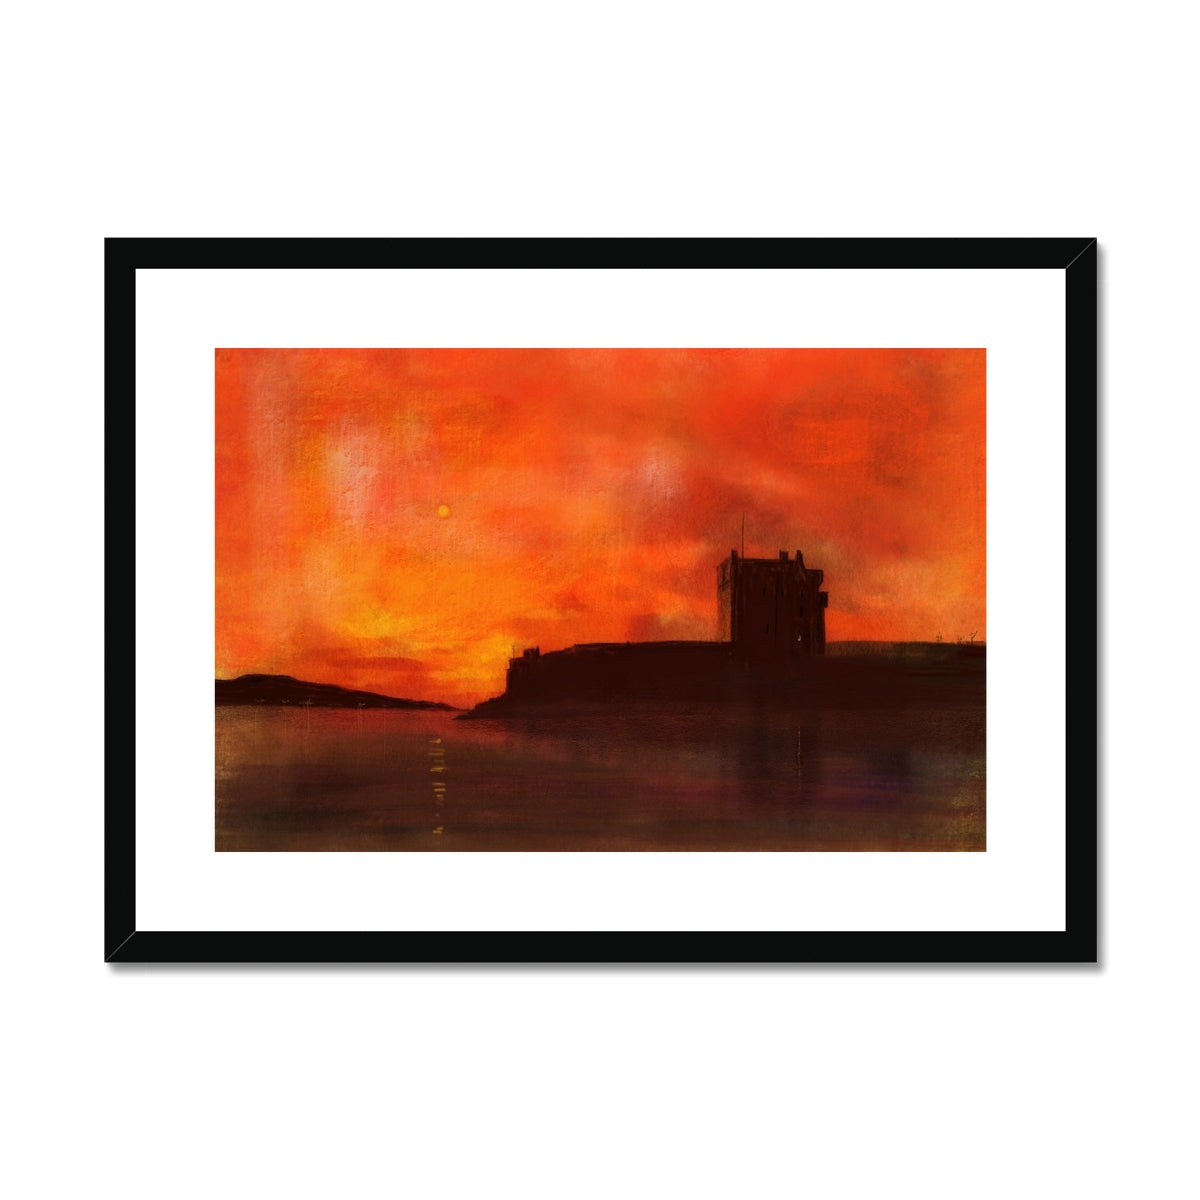 Broughty Castle Sunset Painting | Framed & Mounted Prints From Scotland-Framed & Mounted Prints-Historic & Iconic Scotland Art Gallery-A2 Landscape-Black Frame-Paintings, Prints, Homeware, Art Gifts From Scotland By Scottish Artist Kevin Hunter